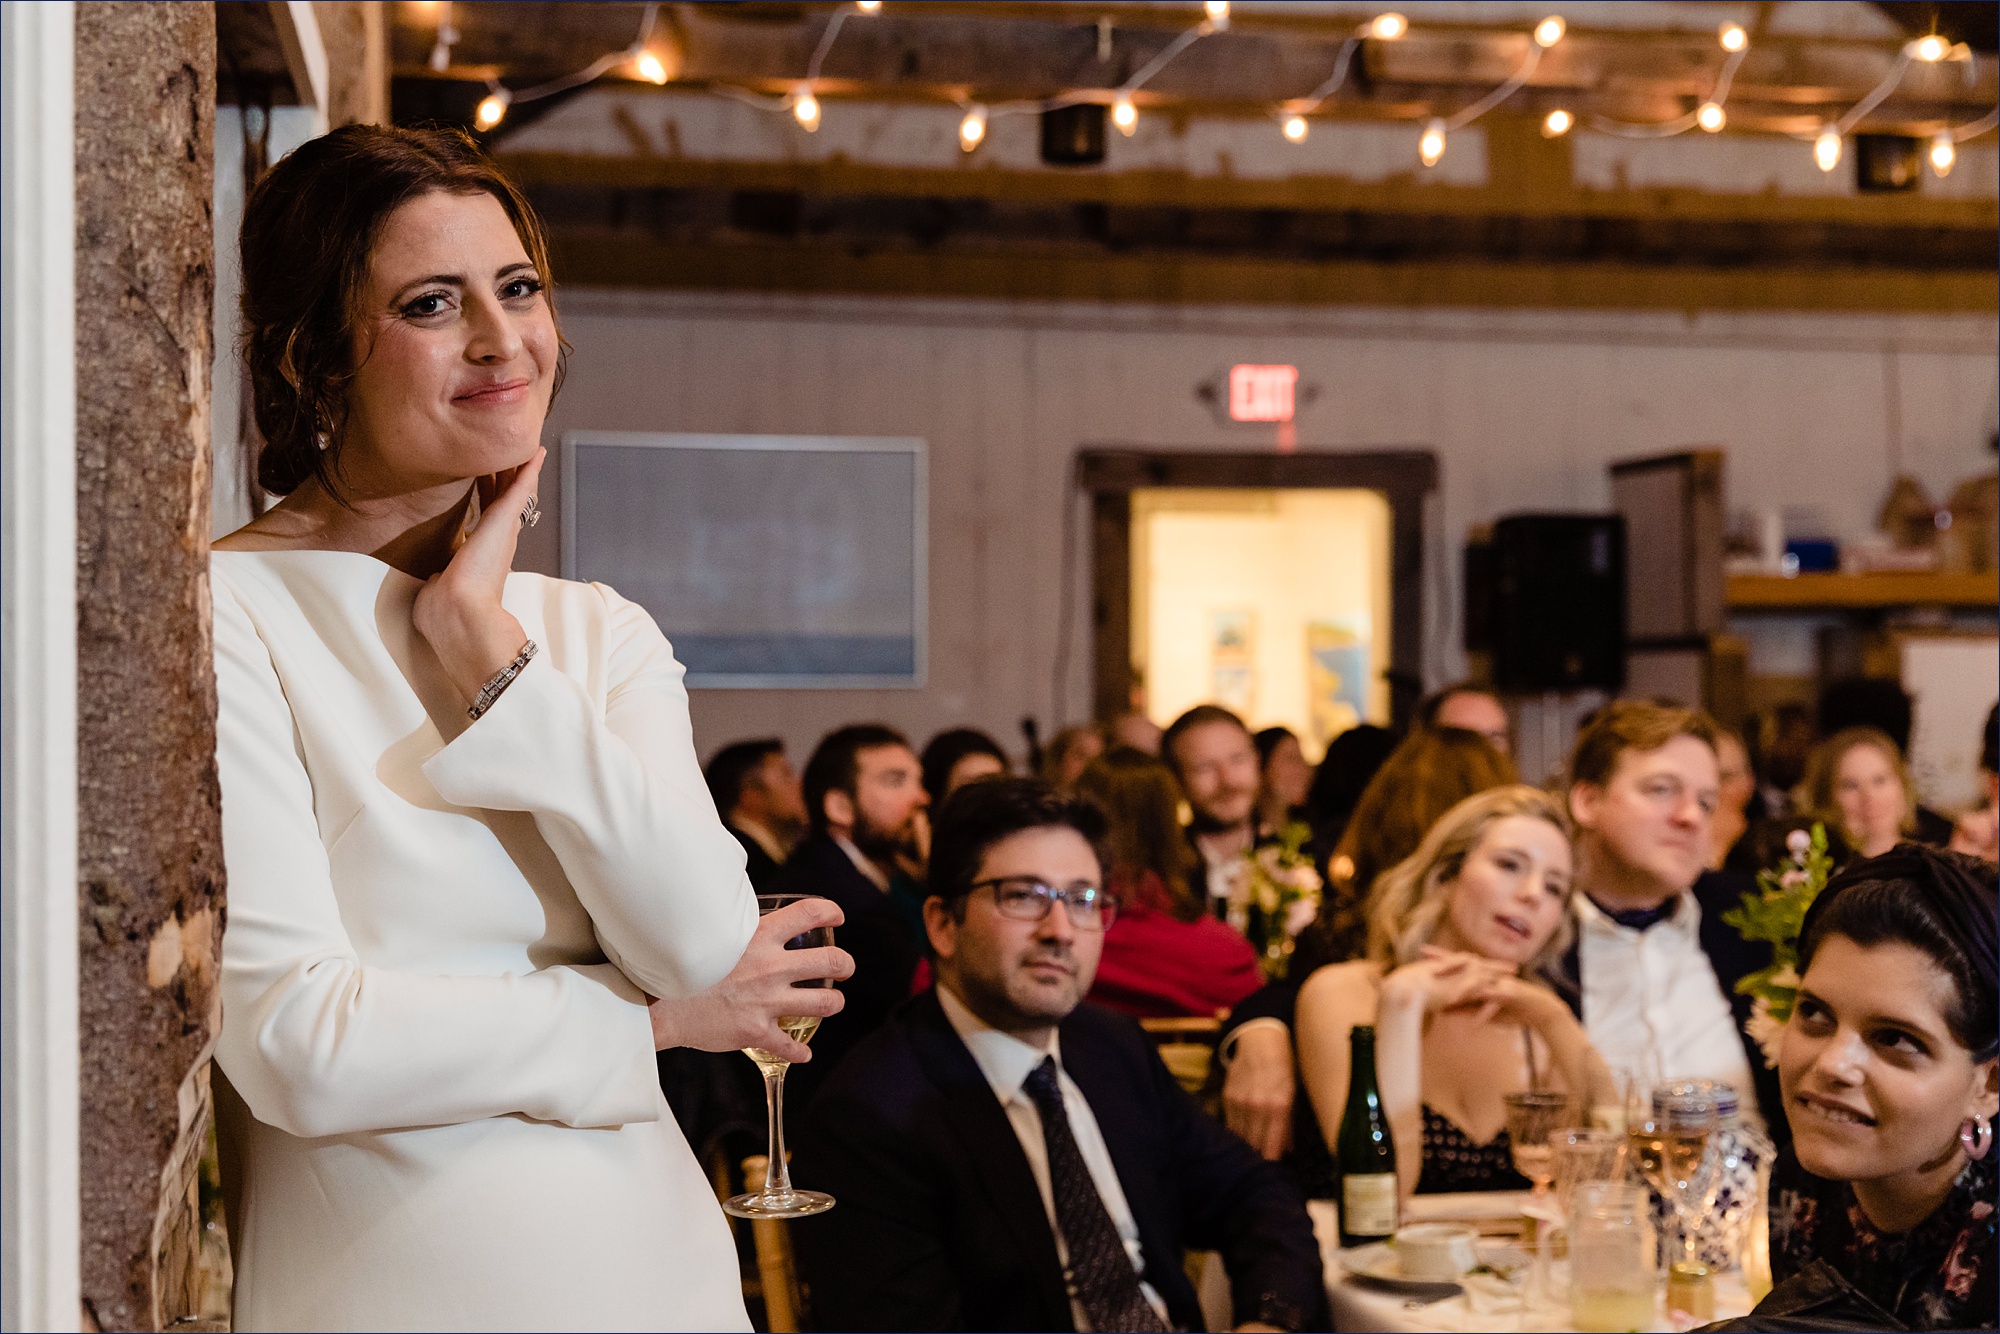 The bride can't contain her emotions listening to the toasts on her Maine wedding day